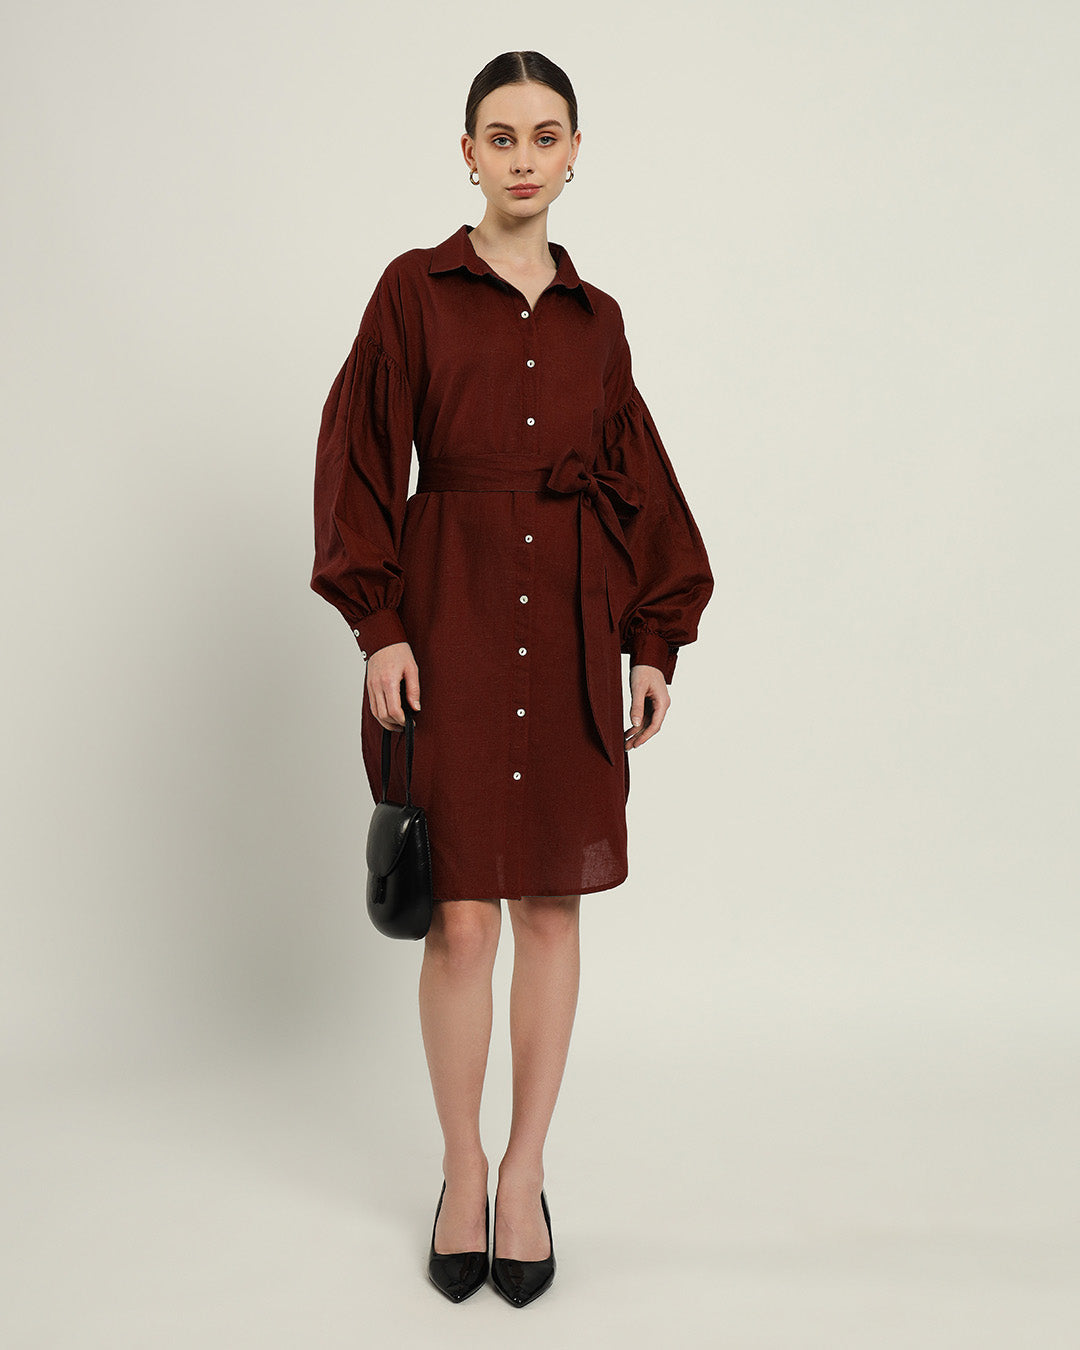 The Derby Rouge Dress